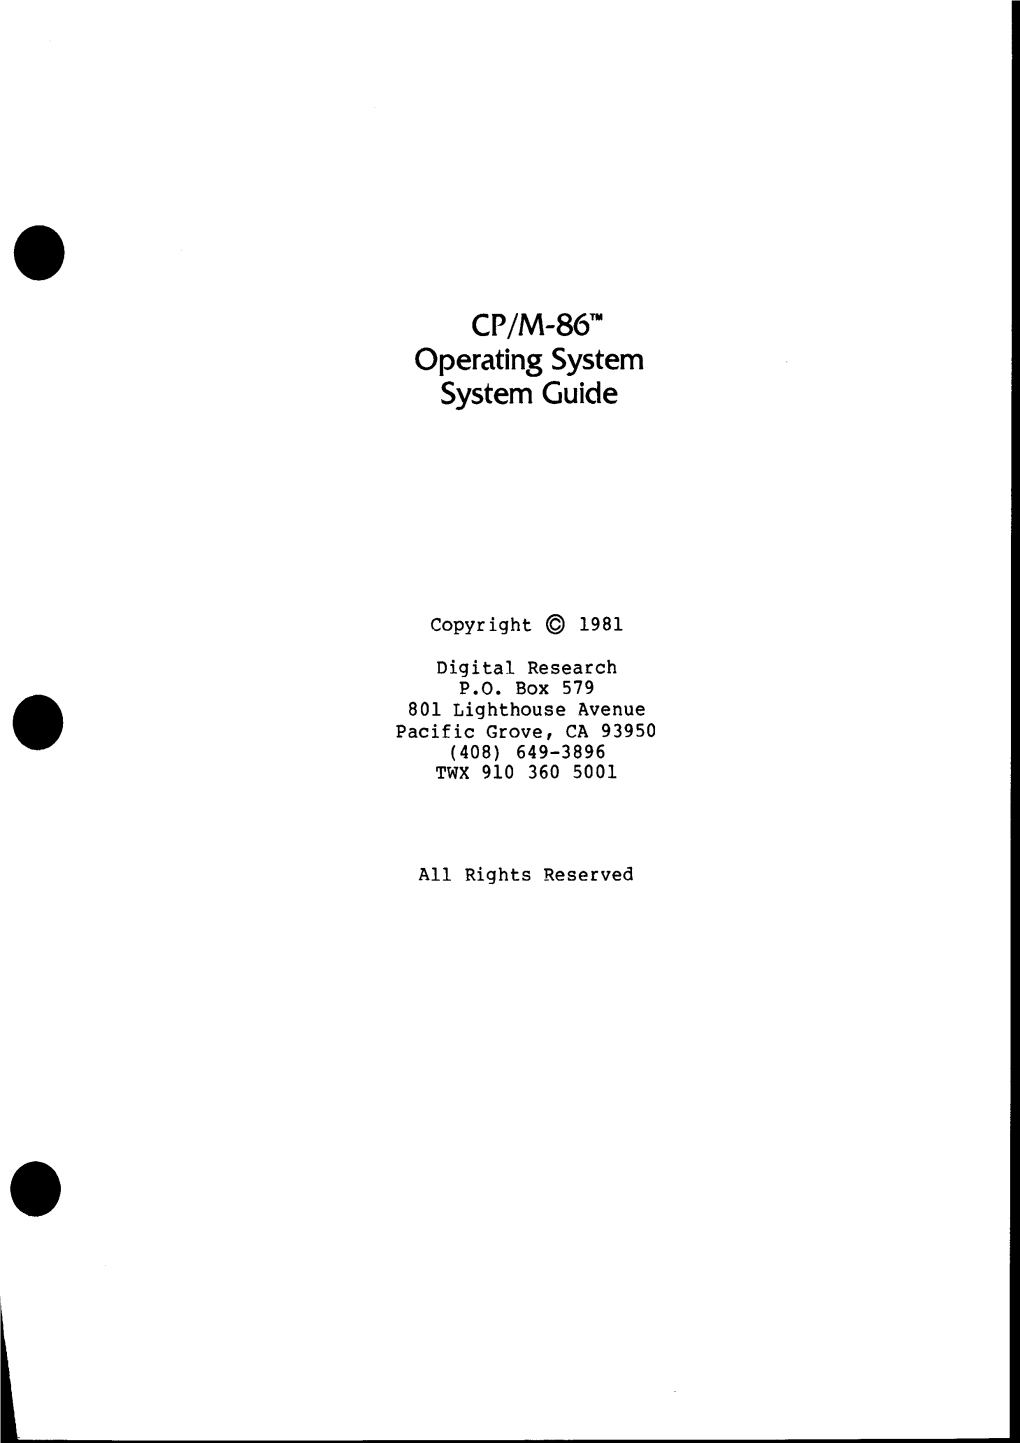 CP/M-86™ Operating System System Guide